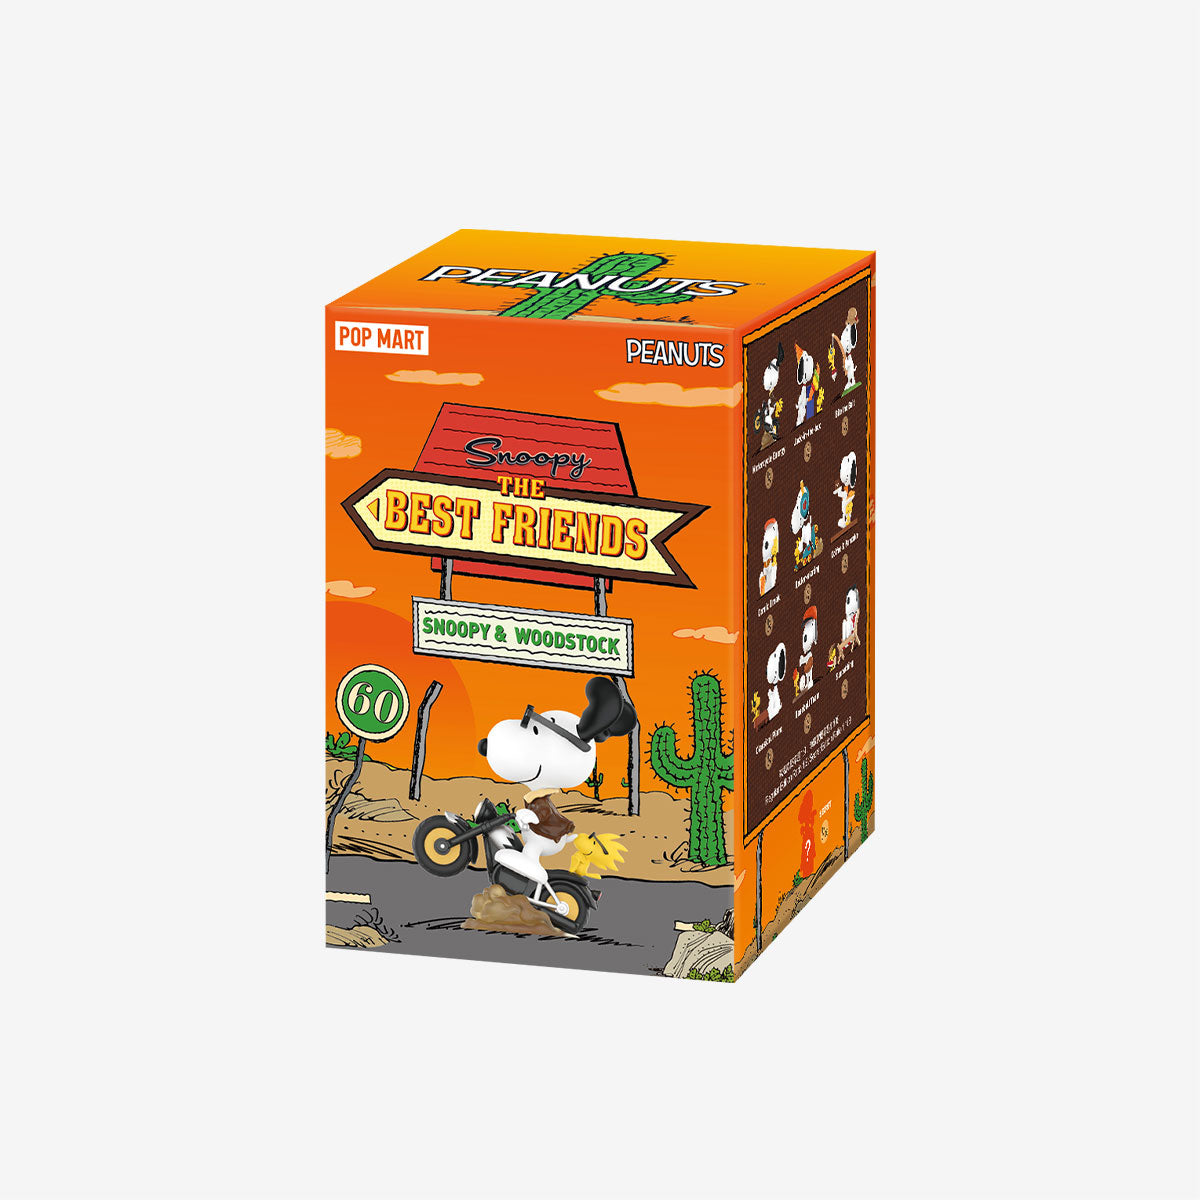 【New】Pop Mart Snoopy The Best Friends Series Blind Box Figures